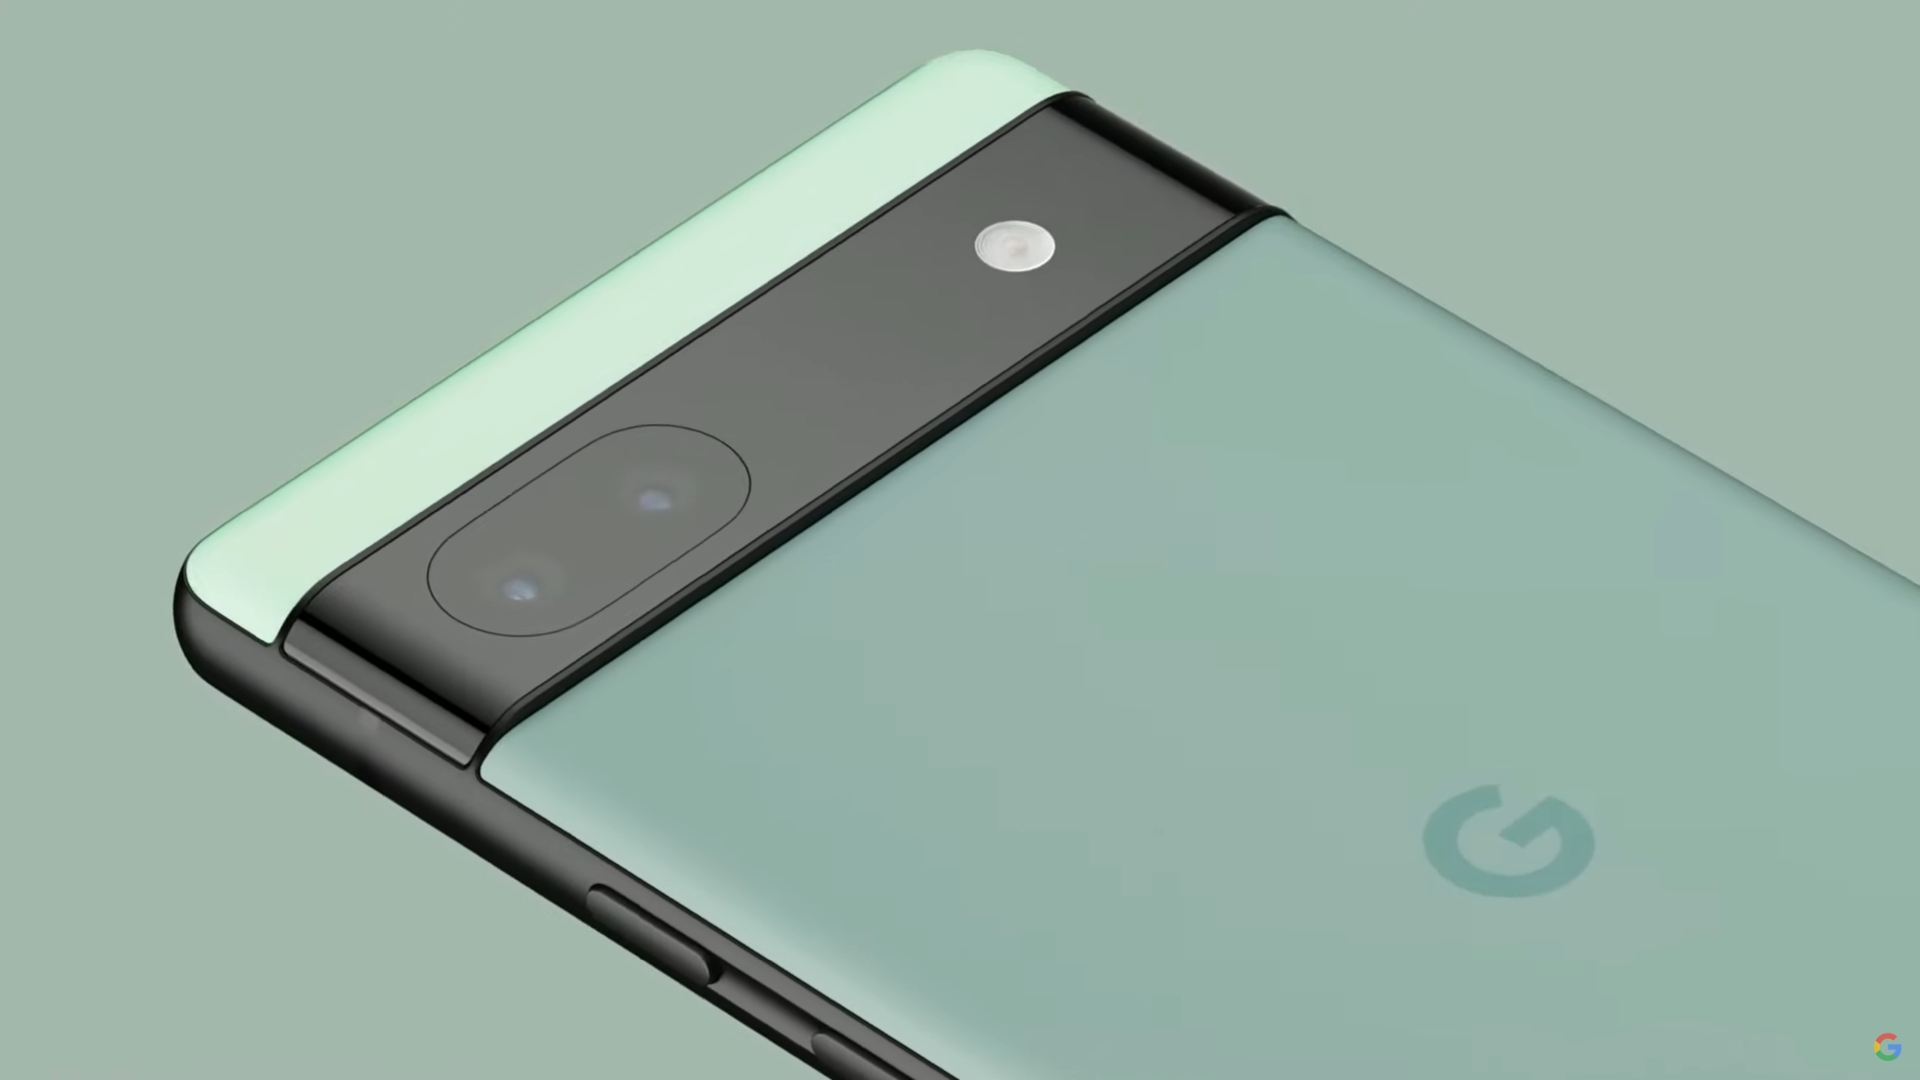 Google Io 2022 Pixel 6A Green Google Pixel,Other Safety Features Heading To More Android Phones,Google Pixel'S Car Crash Detection